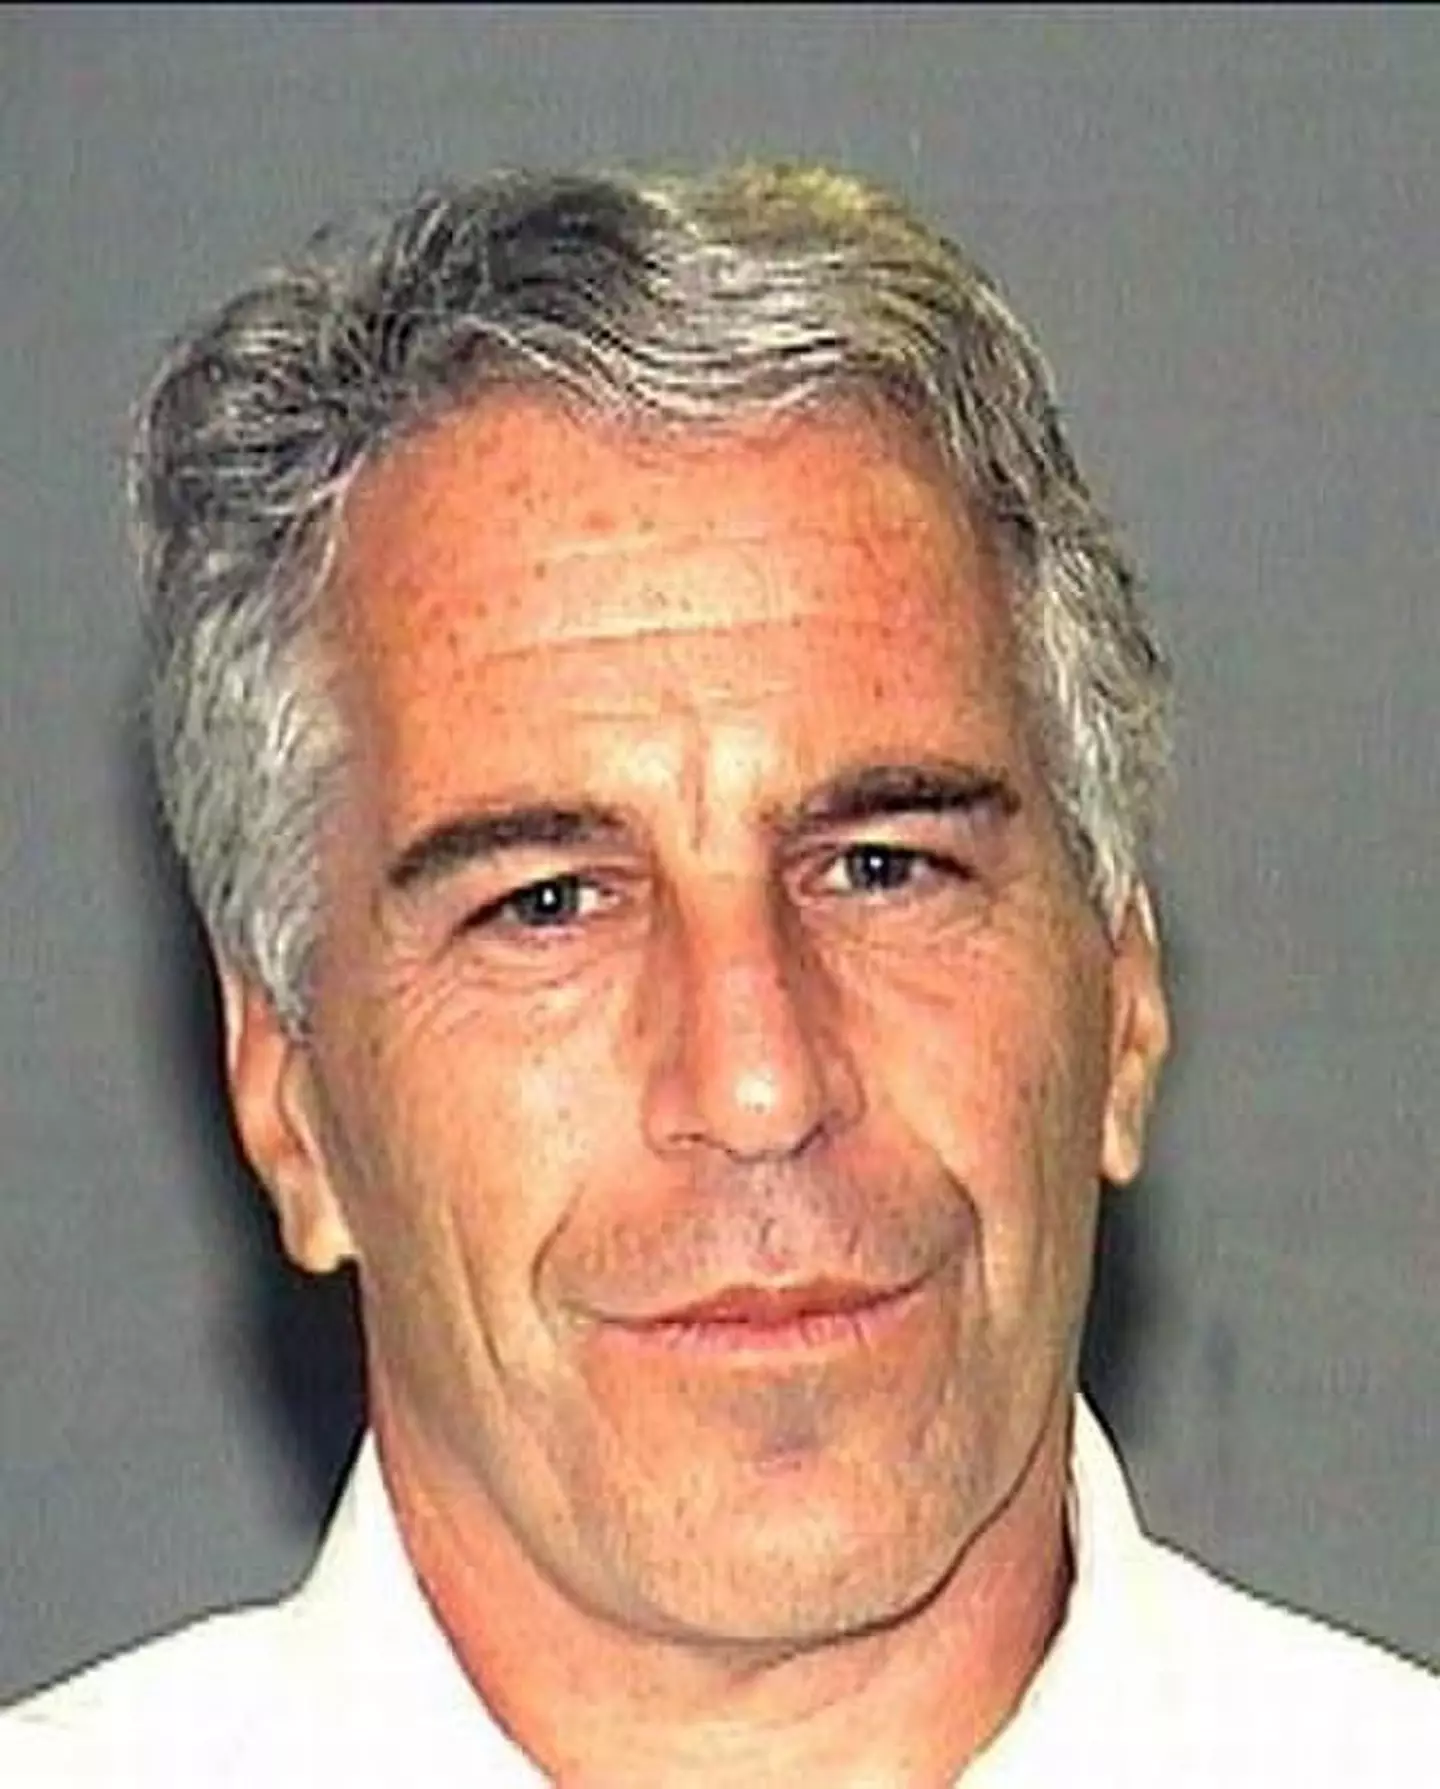 Jeffrey Epstein died in 2019 after being convicted on sex trafficking charges.